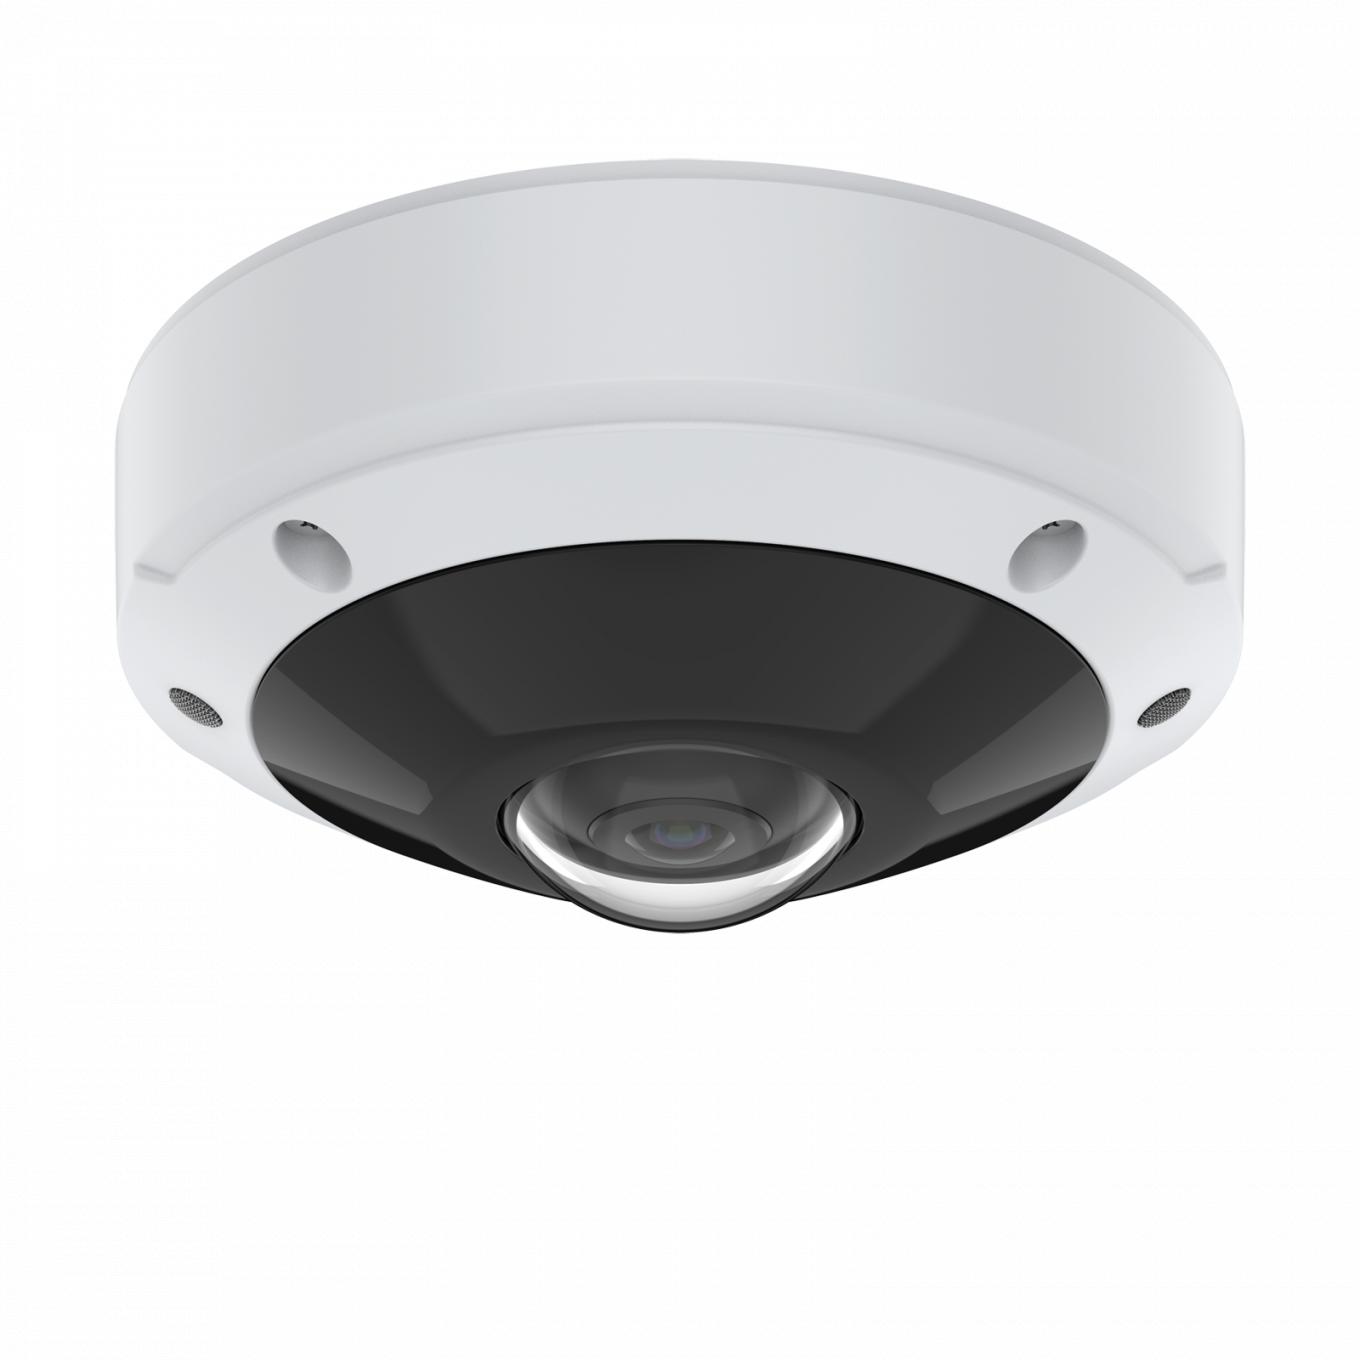 AXIS M3077-PLVE in ceiling from its front